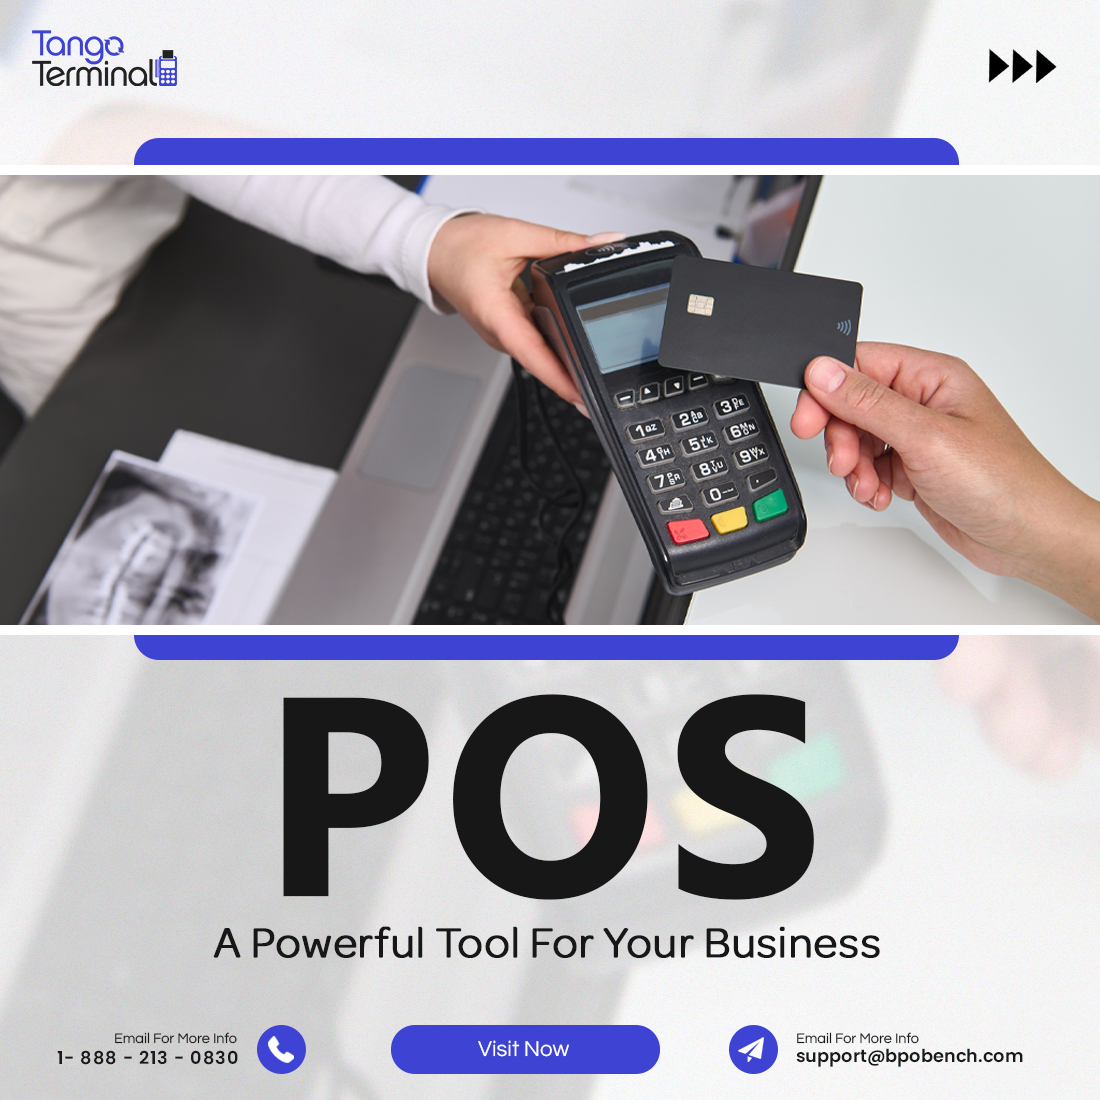 POS systems are not just about processing transactions; they're powerful tools for managing your business operations efficiently.

#tangoterminal #pos #retailbusiness #automatingtasks #marketingsolution #ecommerce